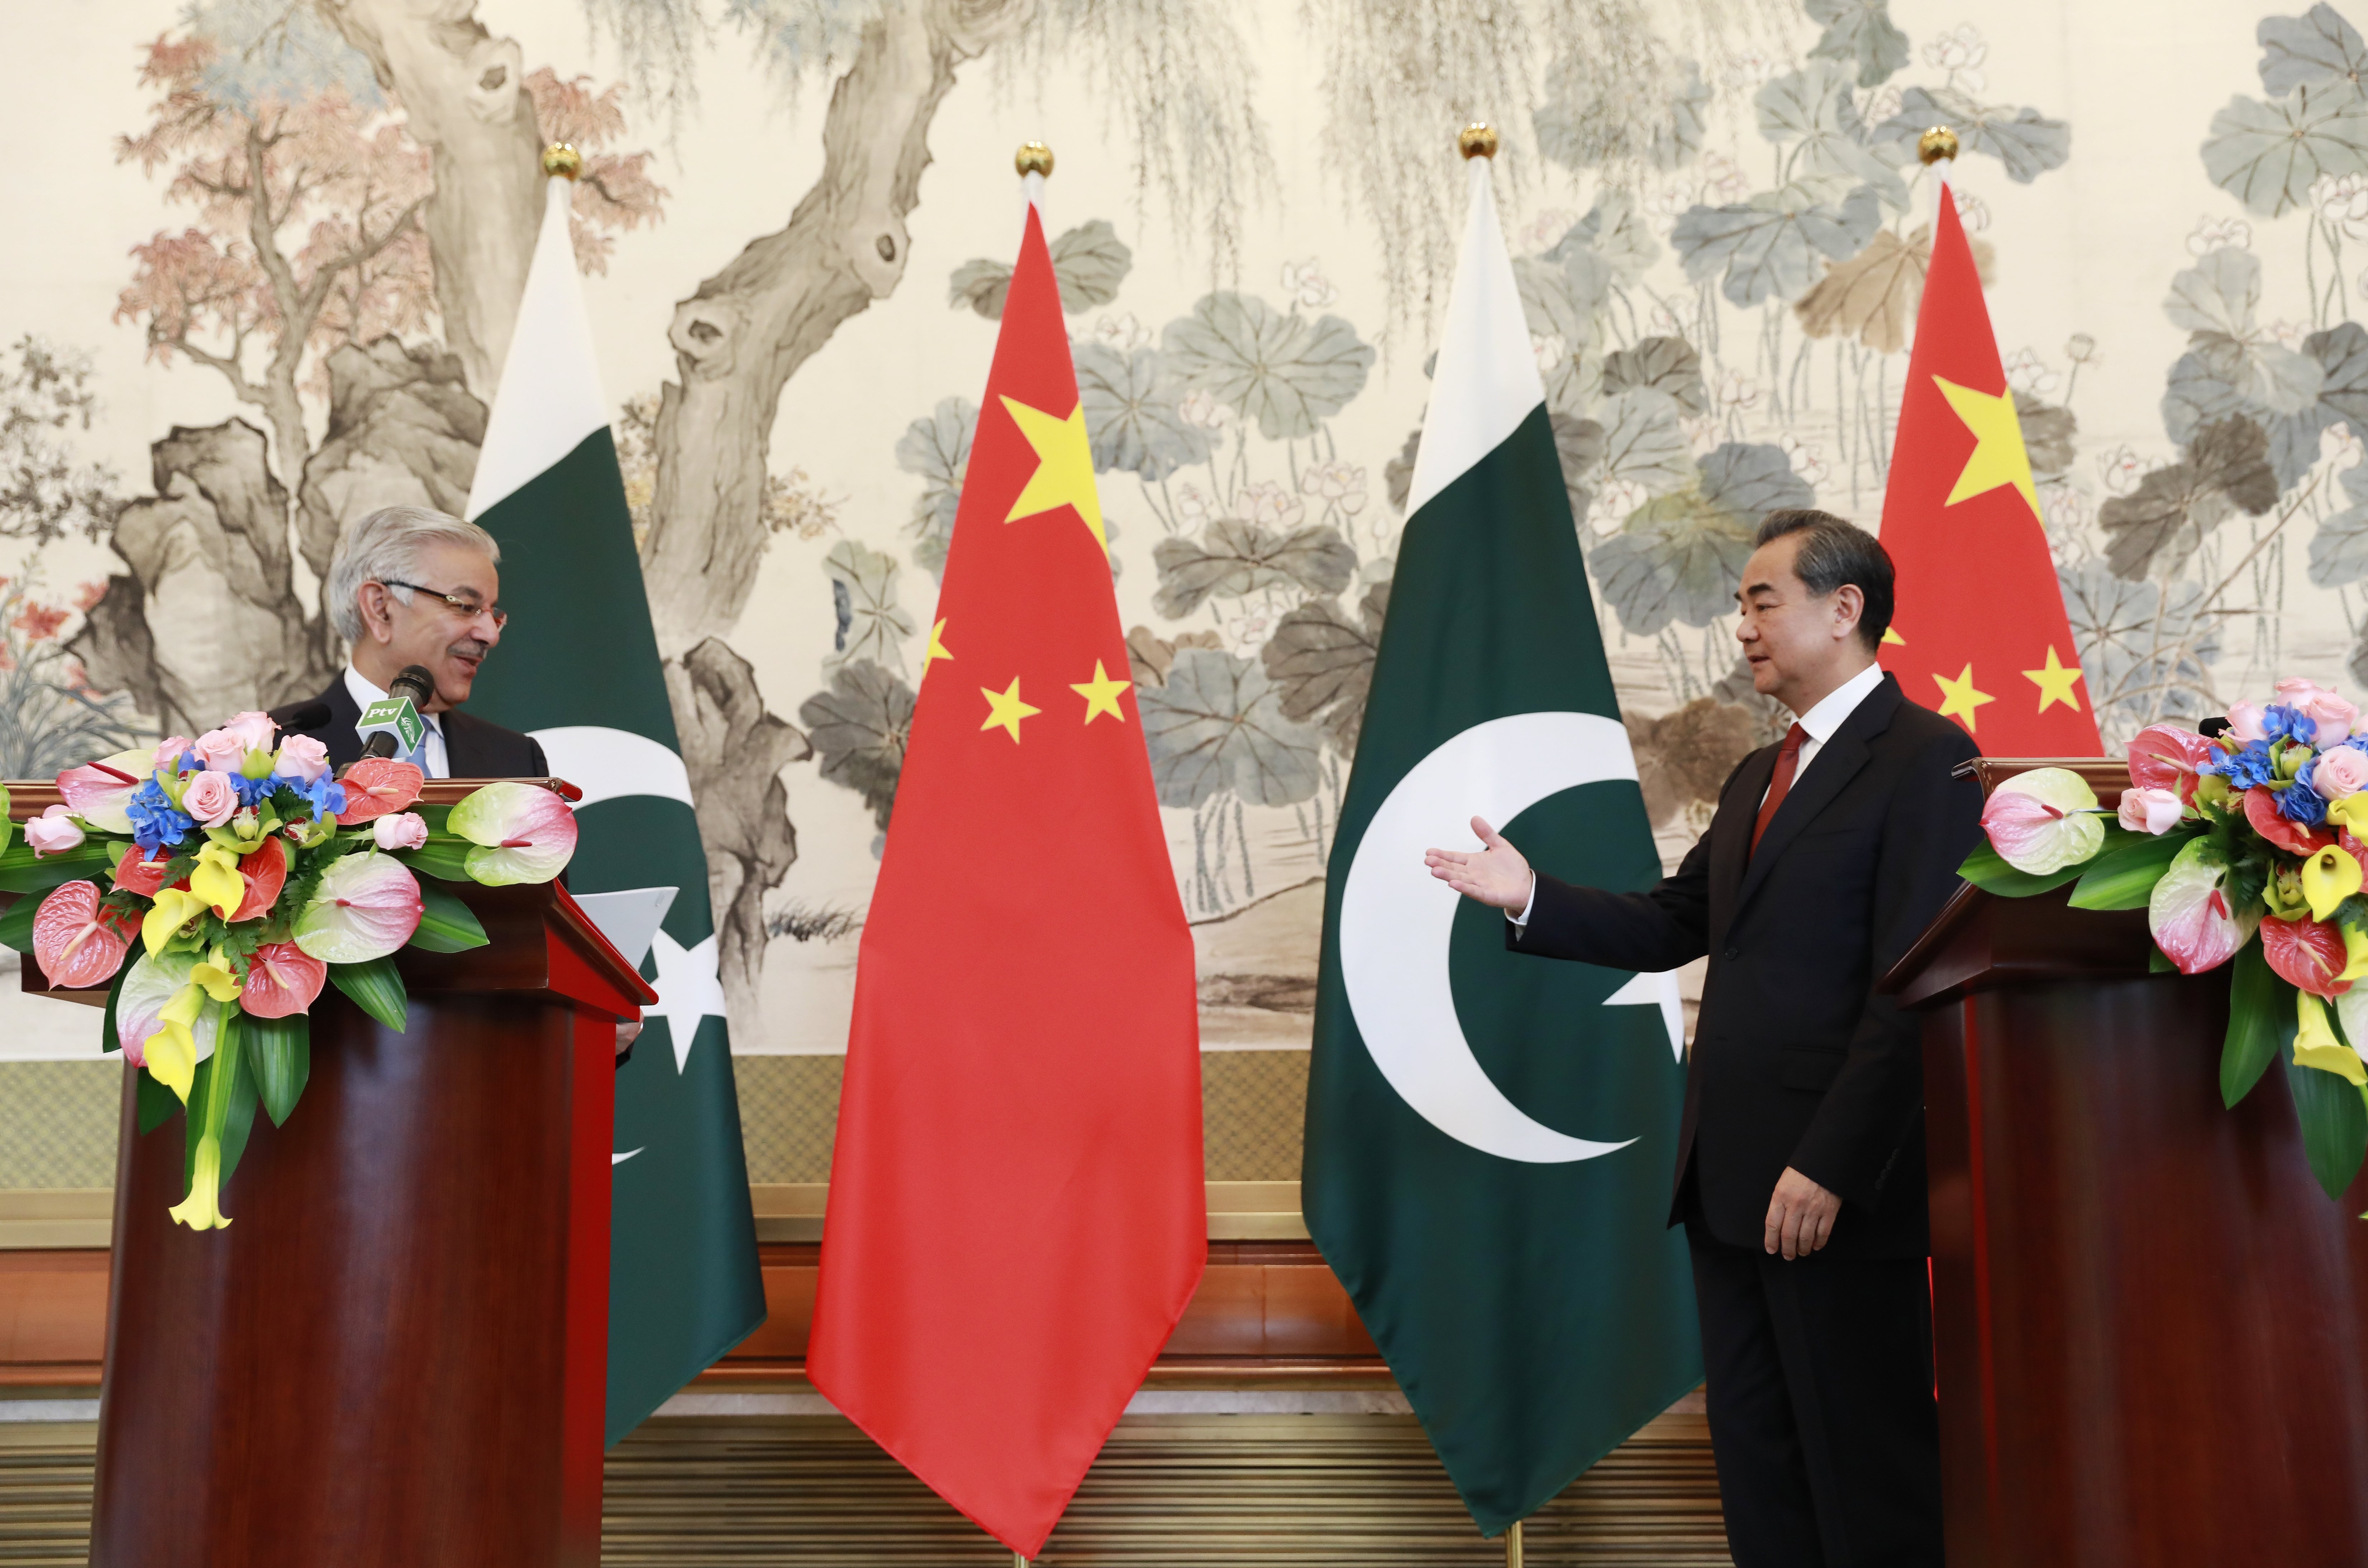 Chinese Foreign Minister Wang Yi (right) extends his hand to Pakistani Foreign Minister Khawaja Muhammad Asif during a press conference in Beijing last September. Photo: EPA-EFE